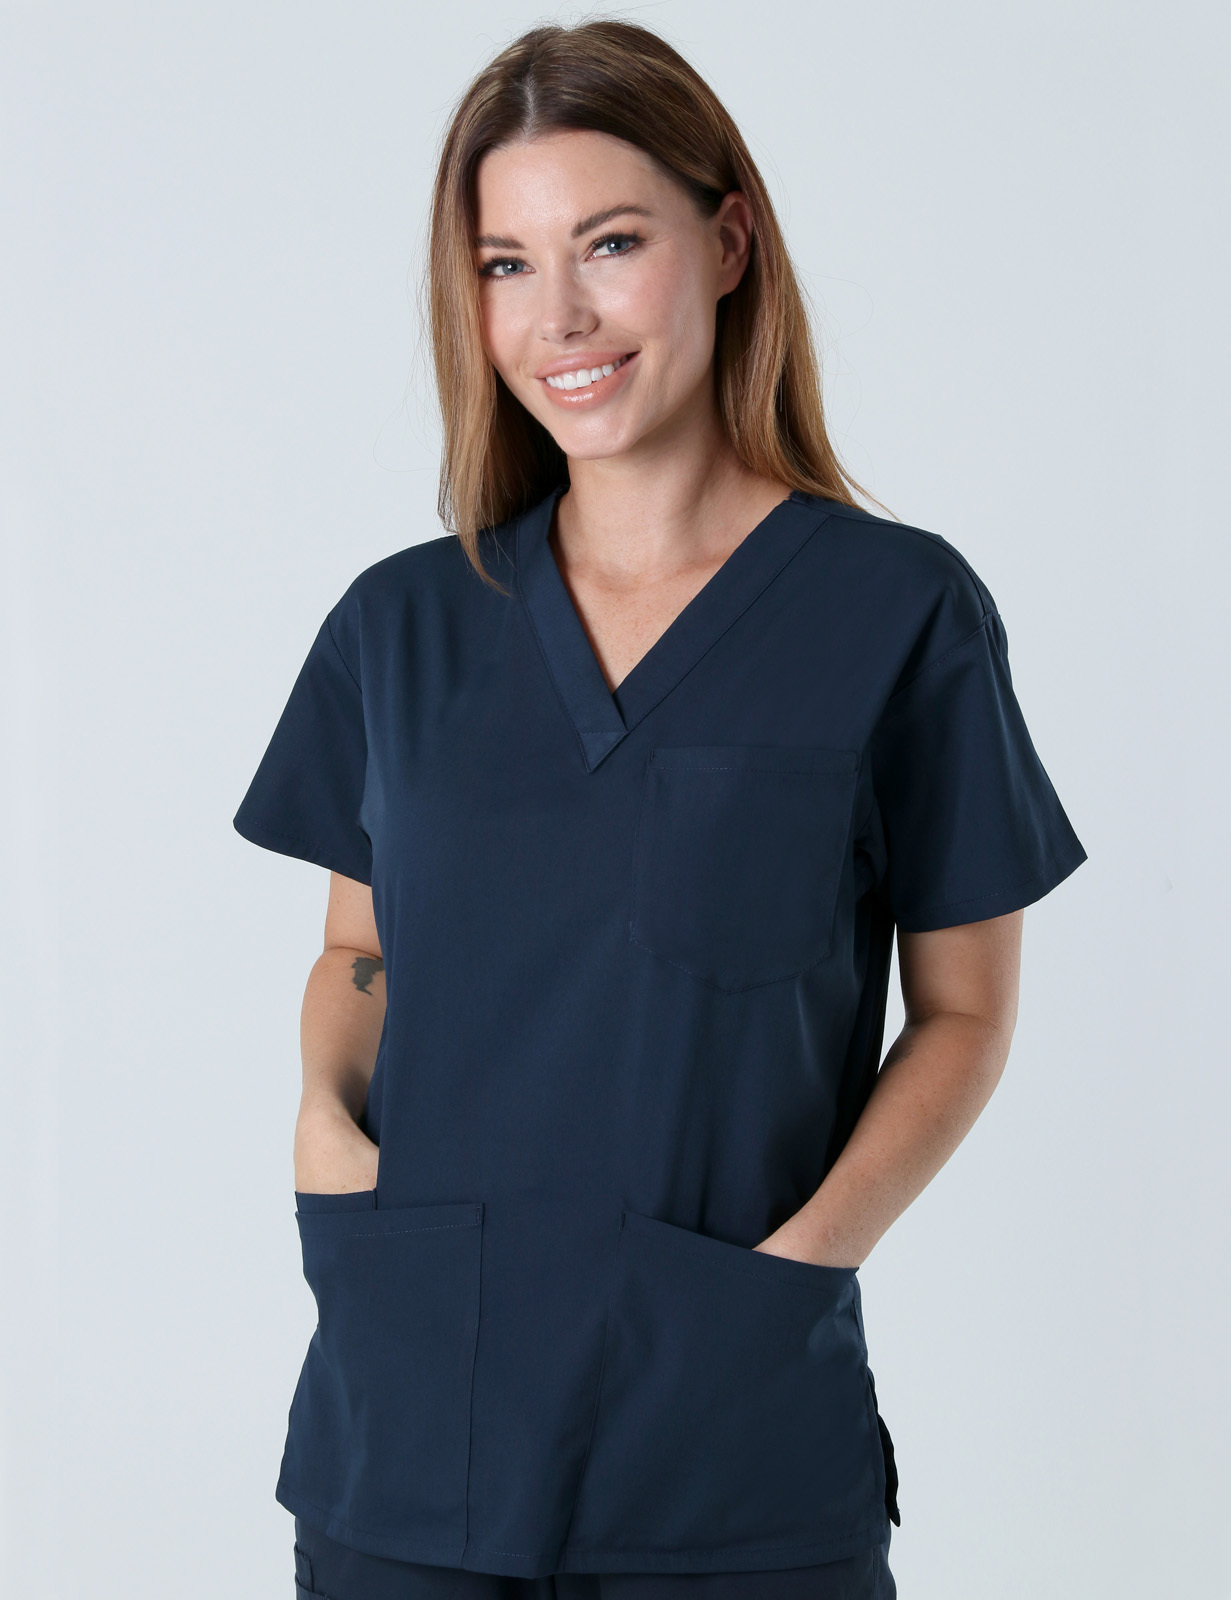 PAH - Nuclear Medicine (4 Pocket Scrub Top and Cargo Pants in Navy incl Logos)